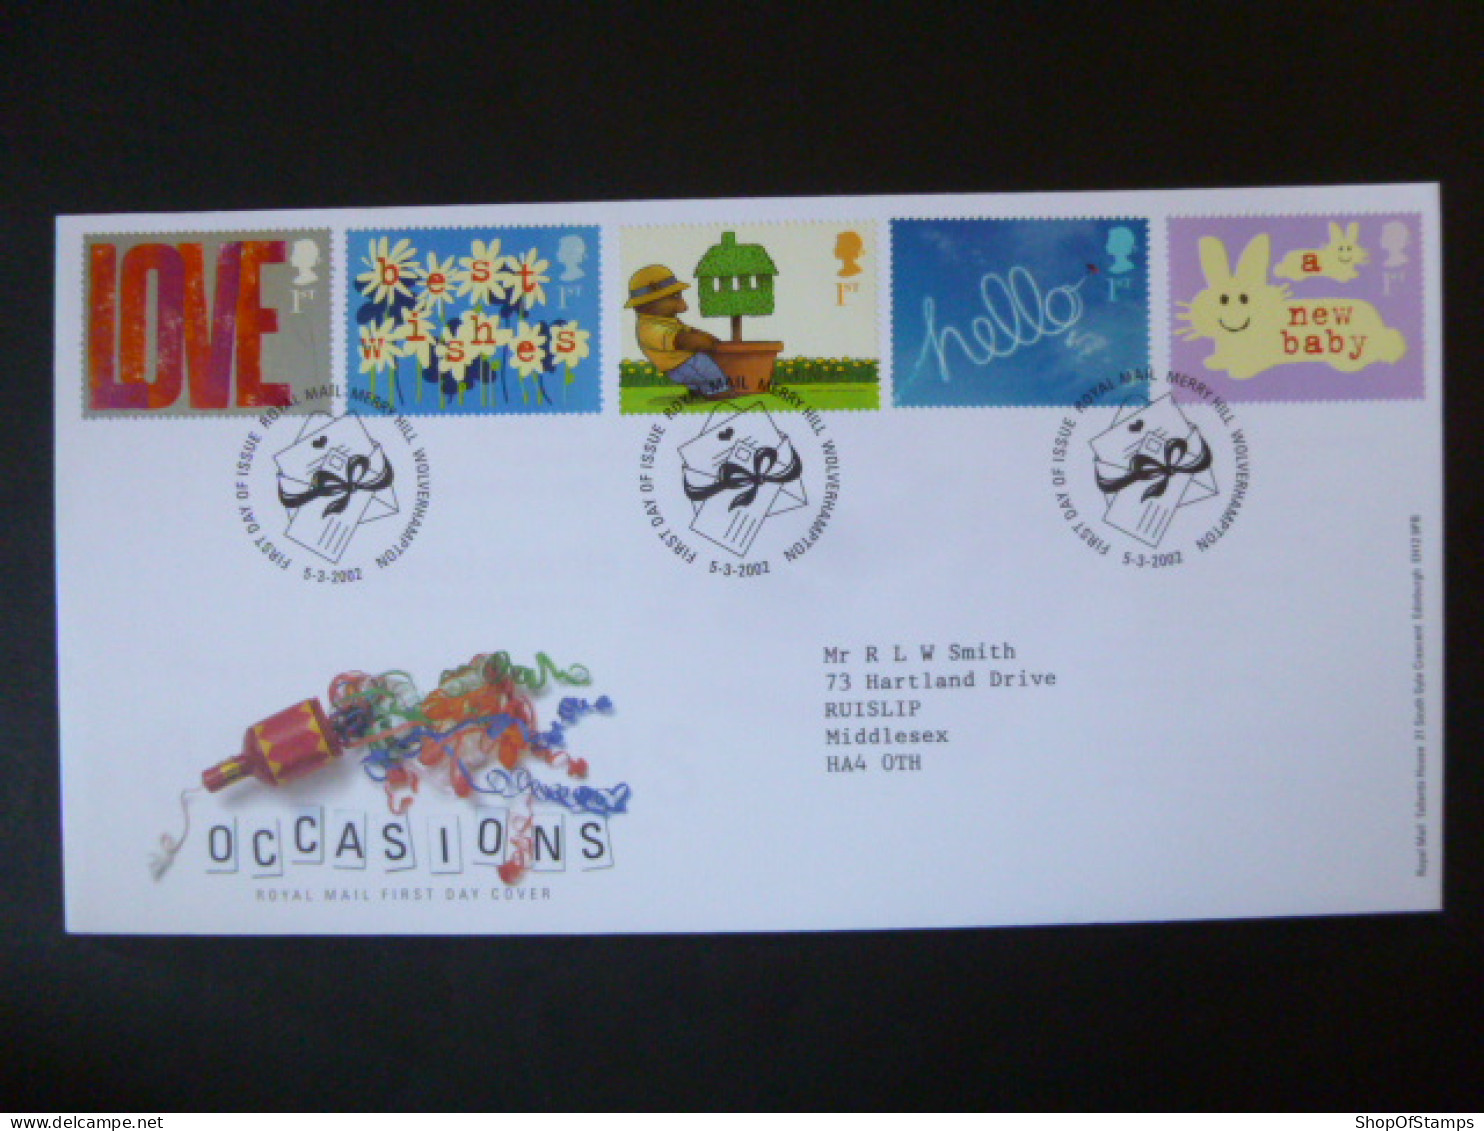 GREAT BRITAIN SG 2260-64 OCCASSIONS GREETING STAMPS FDC MERRY HILL WOLVERHAMPTON - Unclassified